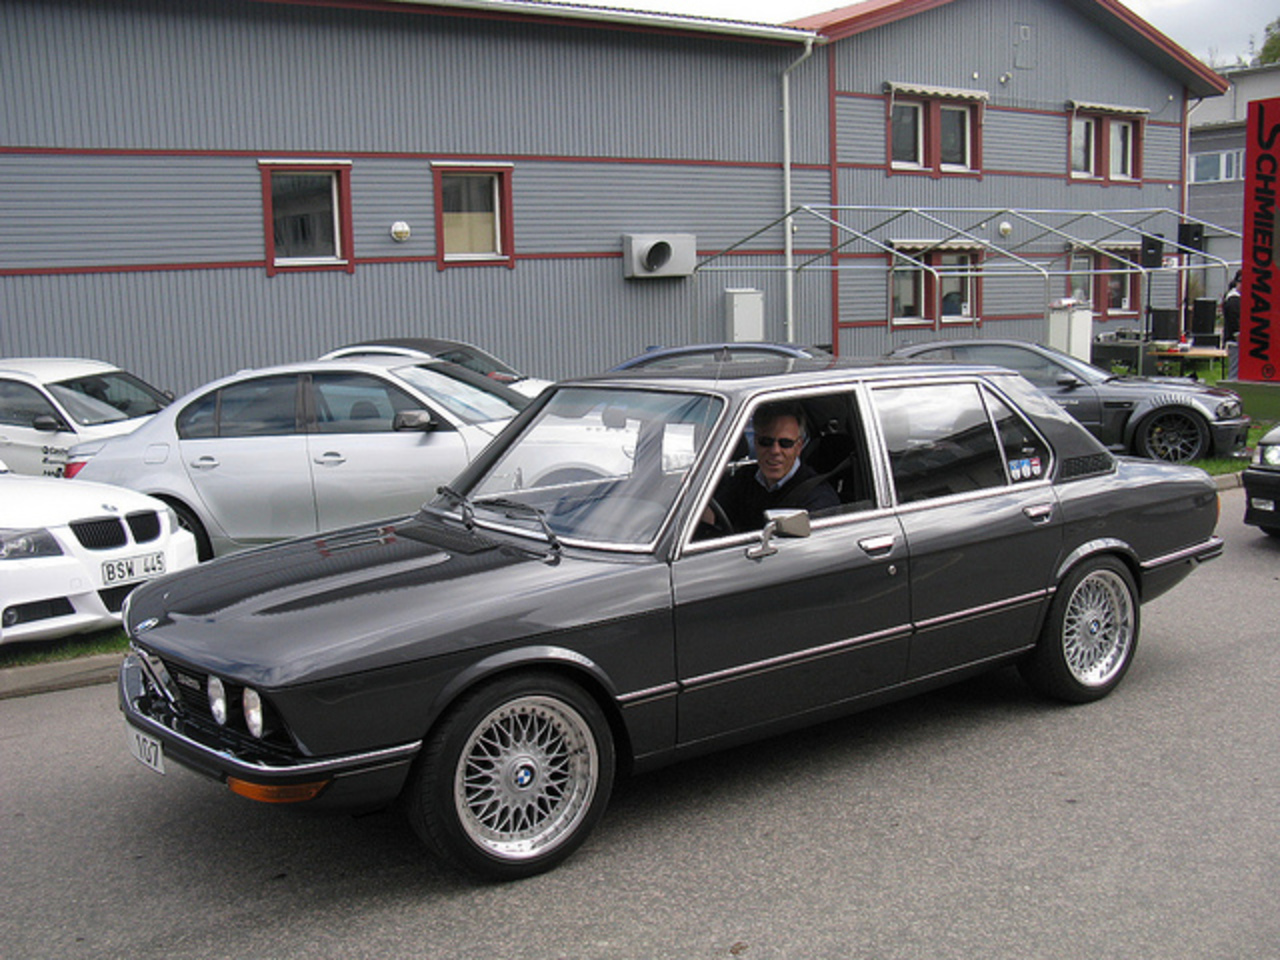 Flickr: The BMW 5 Series (E12 and E28) Pool